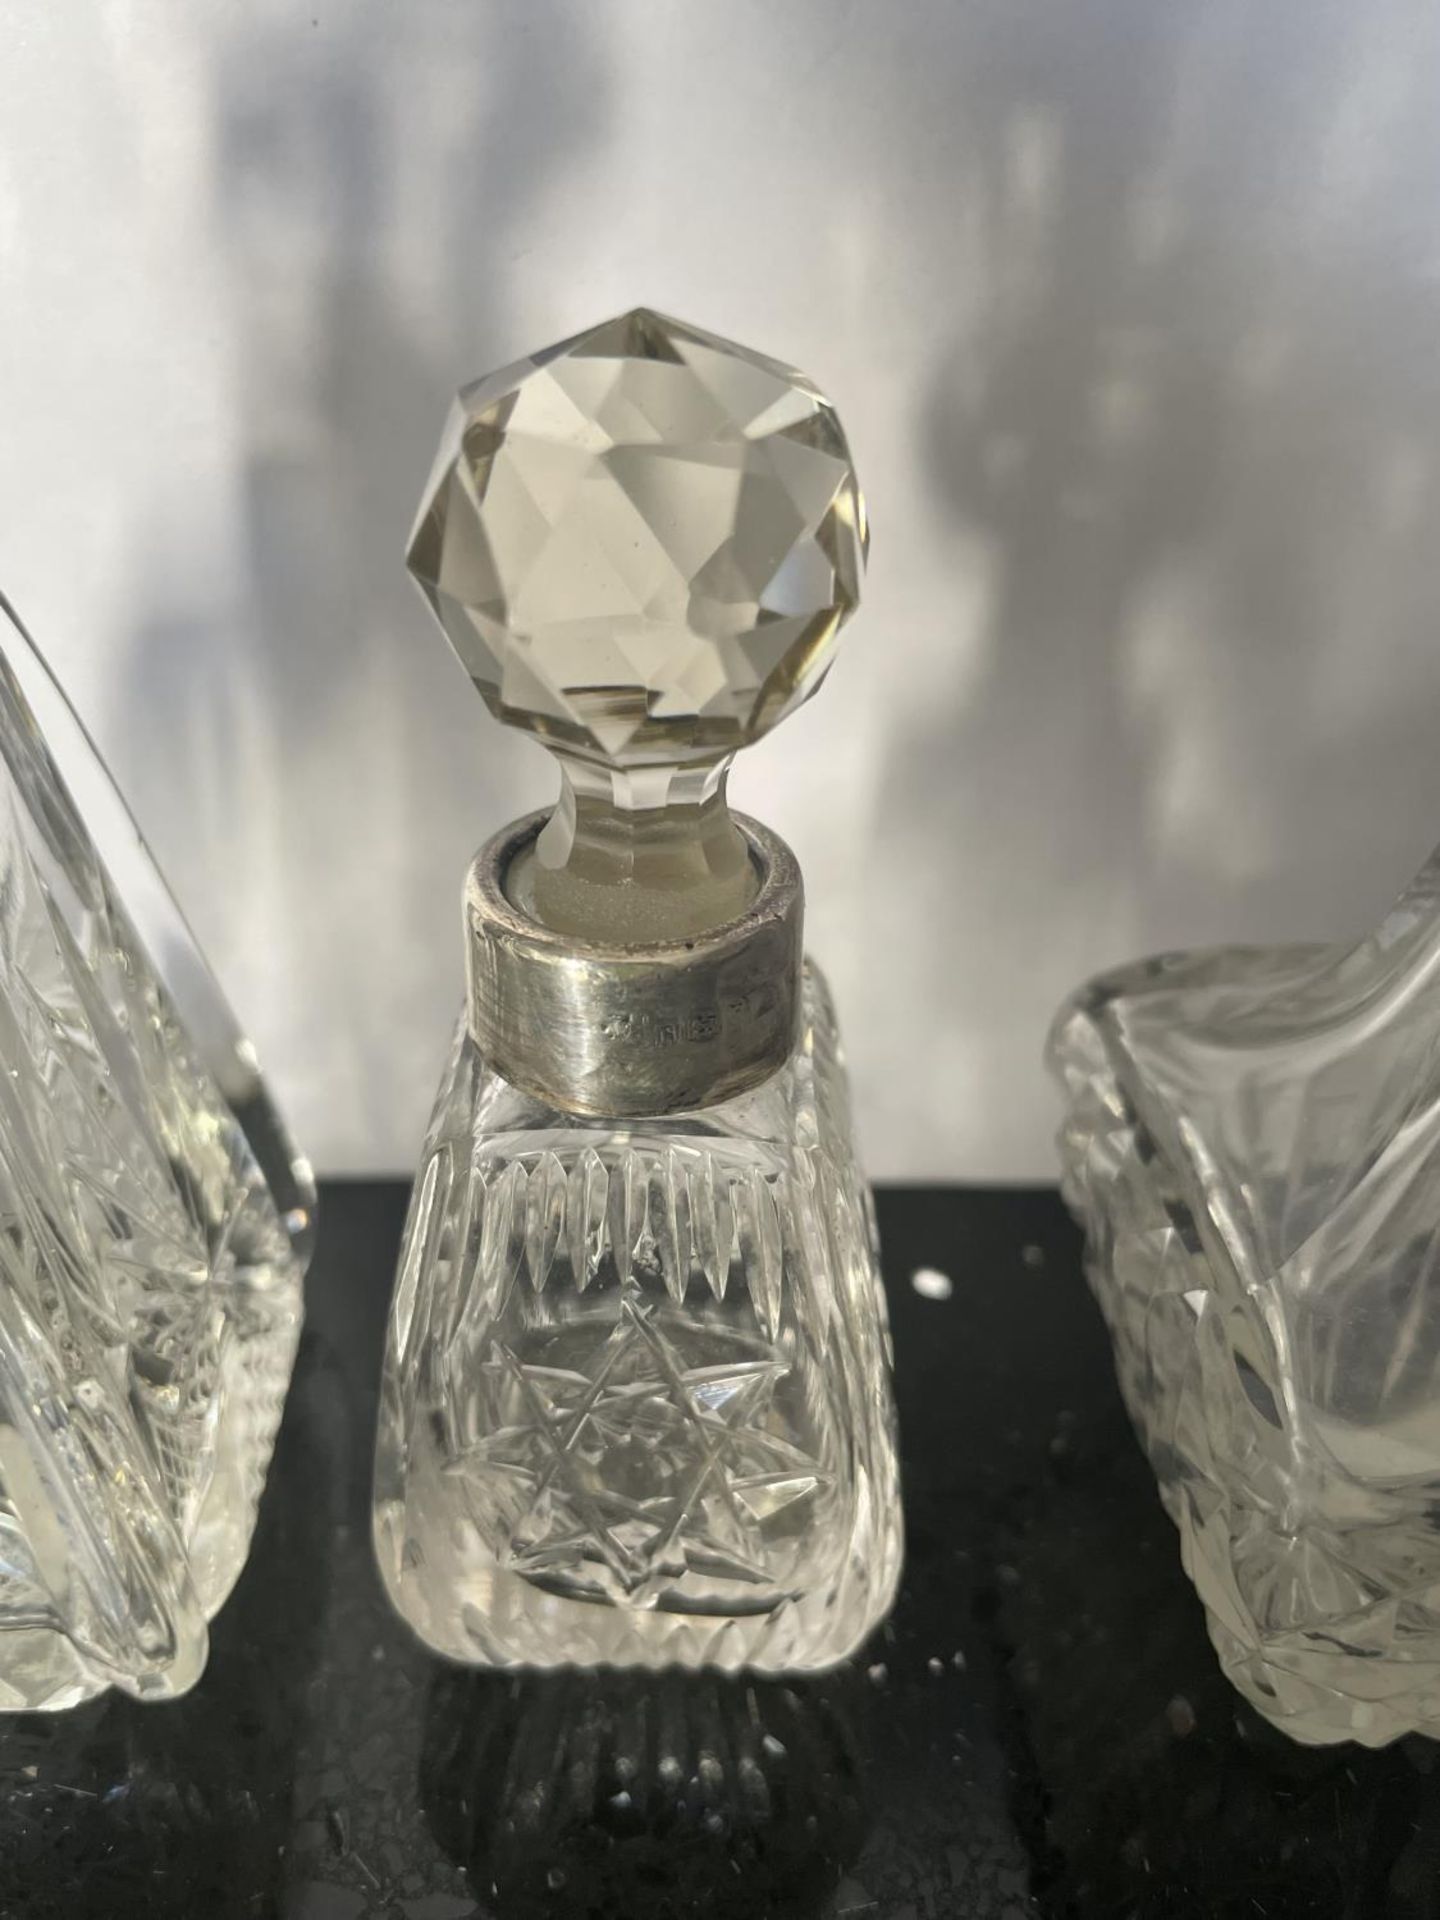 THREE CUT GLASS PERFUME BOTTLE WITH HALLMARKED LONDON SILVER COLLARS - Image 3 of 4